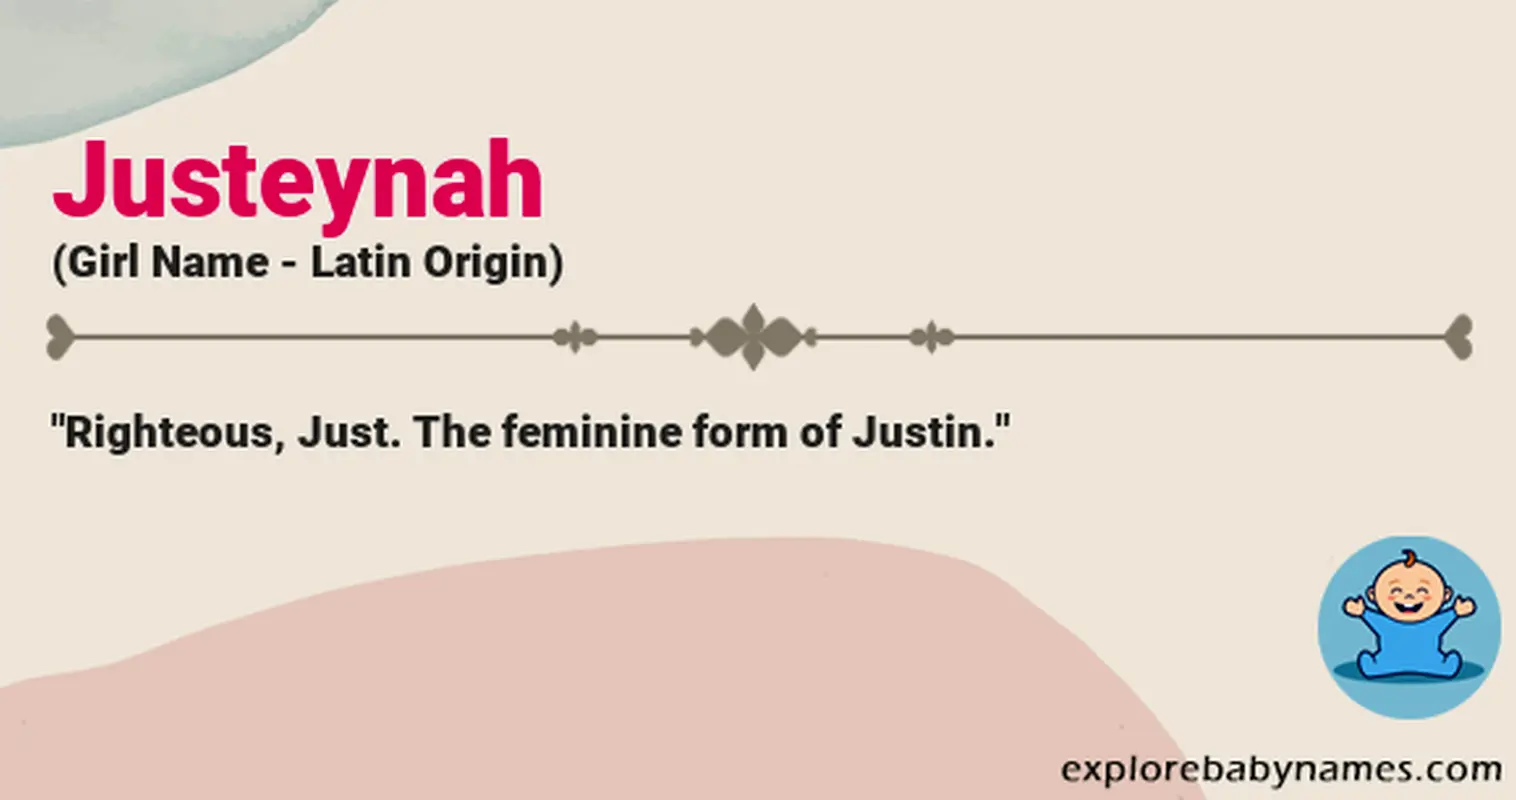 Meaning of Justeynah